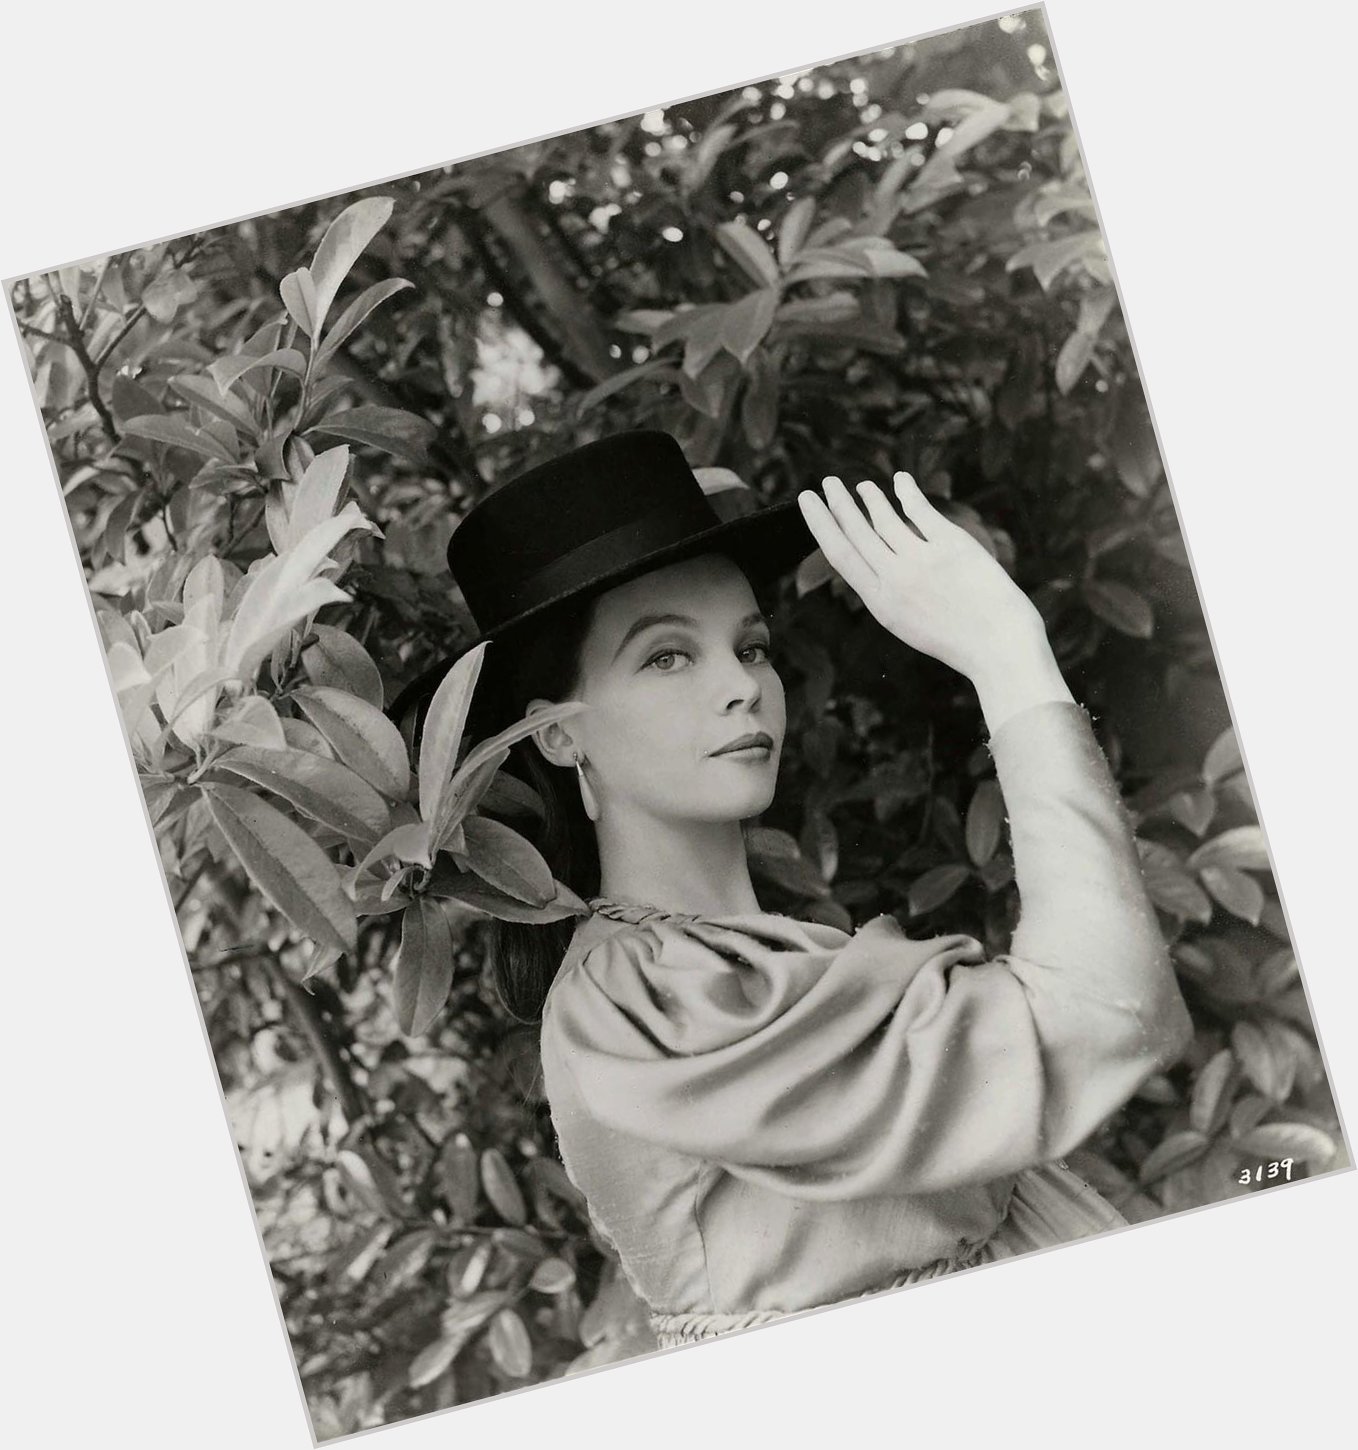 Happy Birthday, Leslie Caron!
Here she is photographed by Cecil Beaton, 1959. 